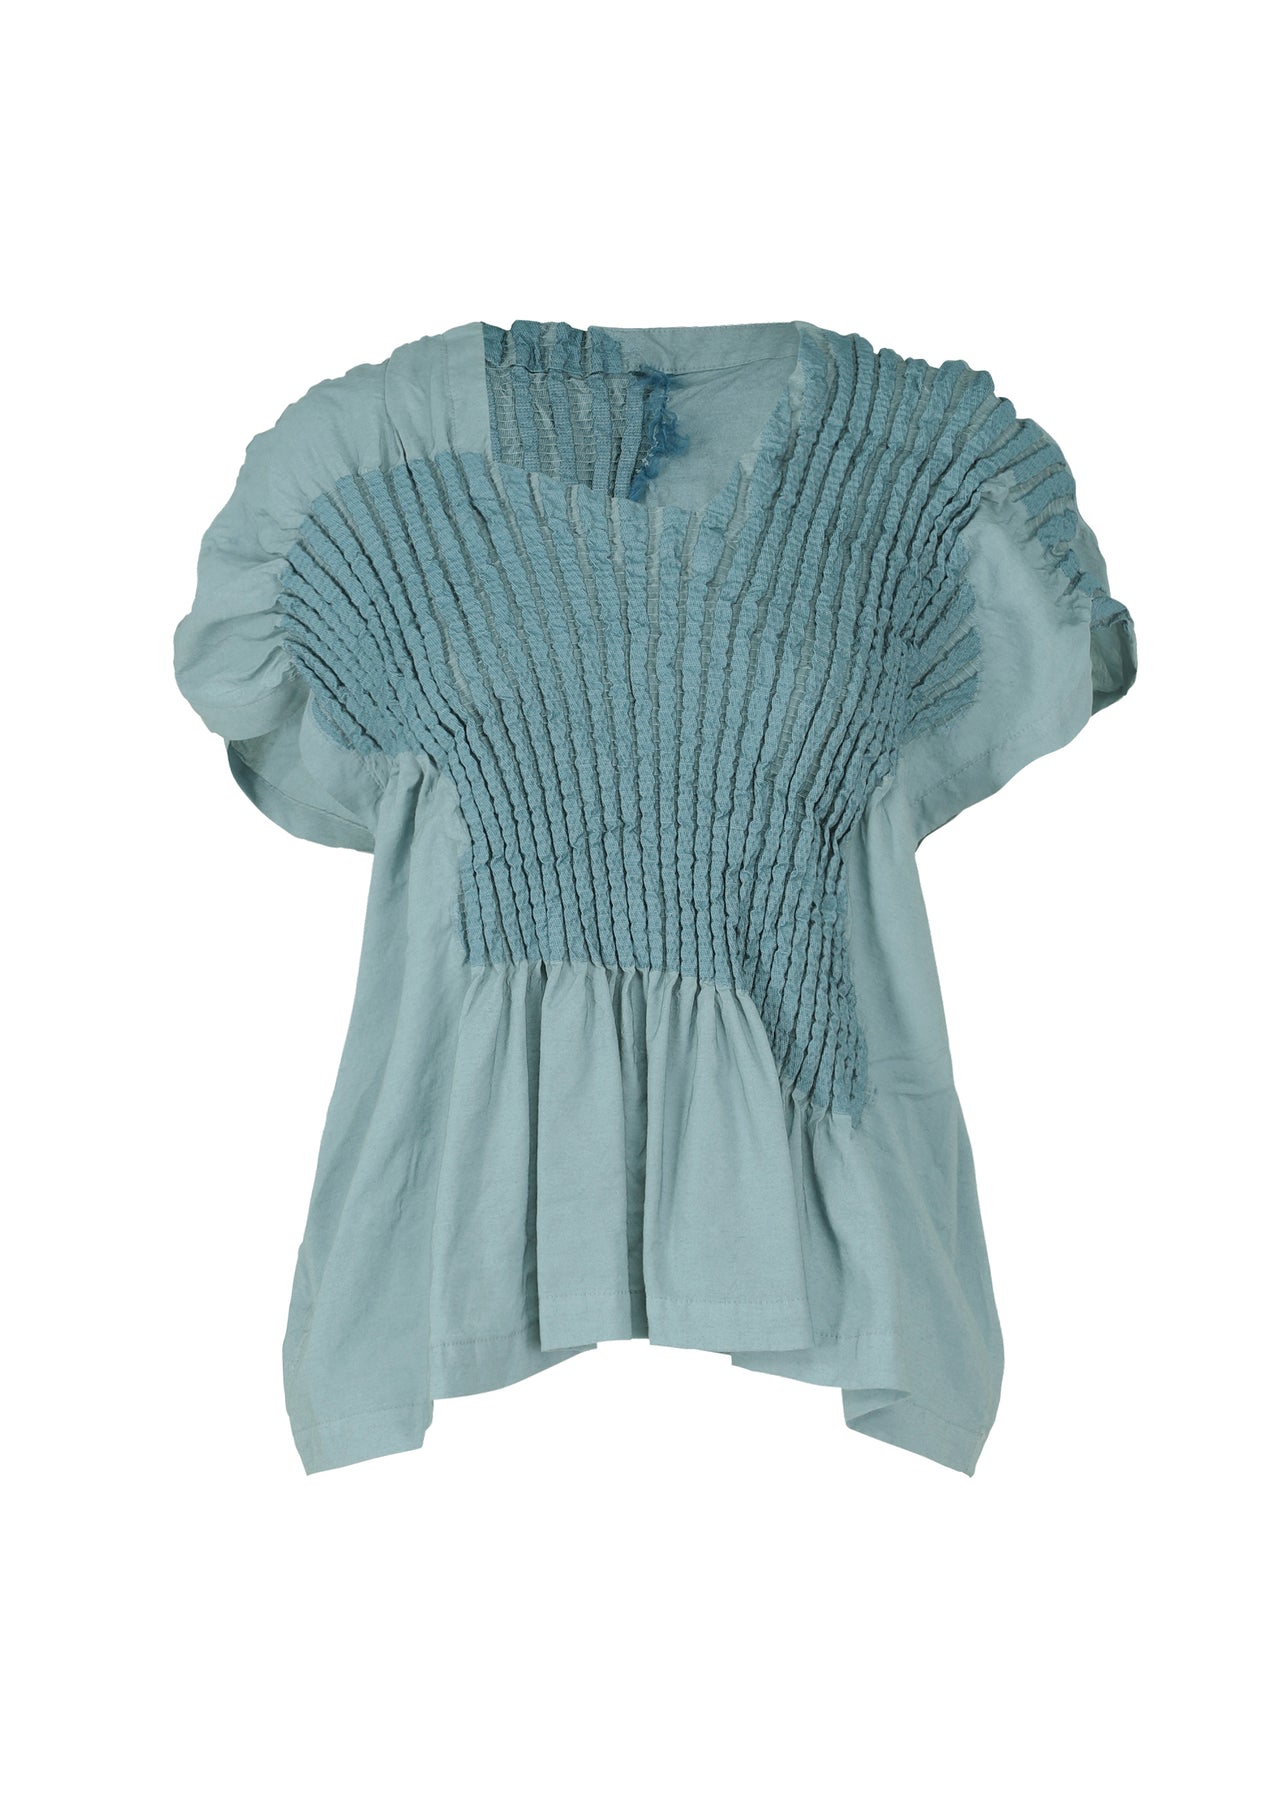 BODY IMPRINT TOP | The official ISSEY MIYAKE ONLINE STORE | ISSEY ...